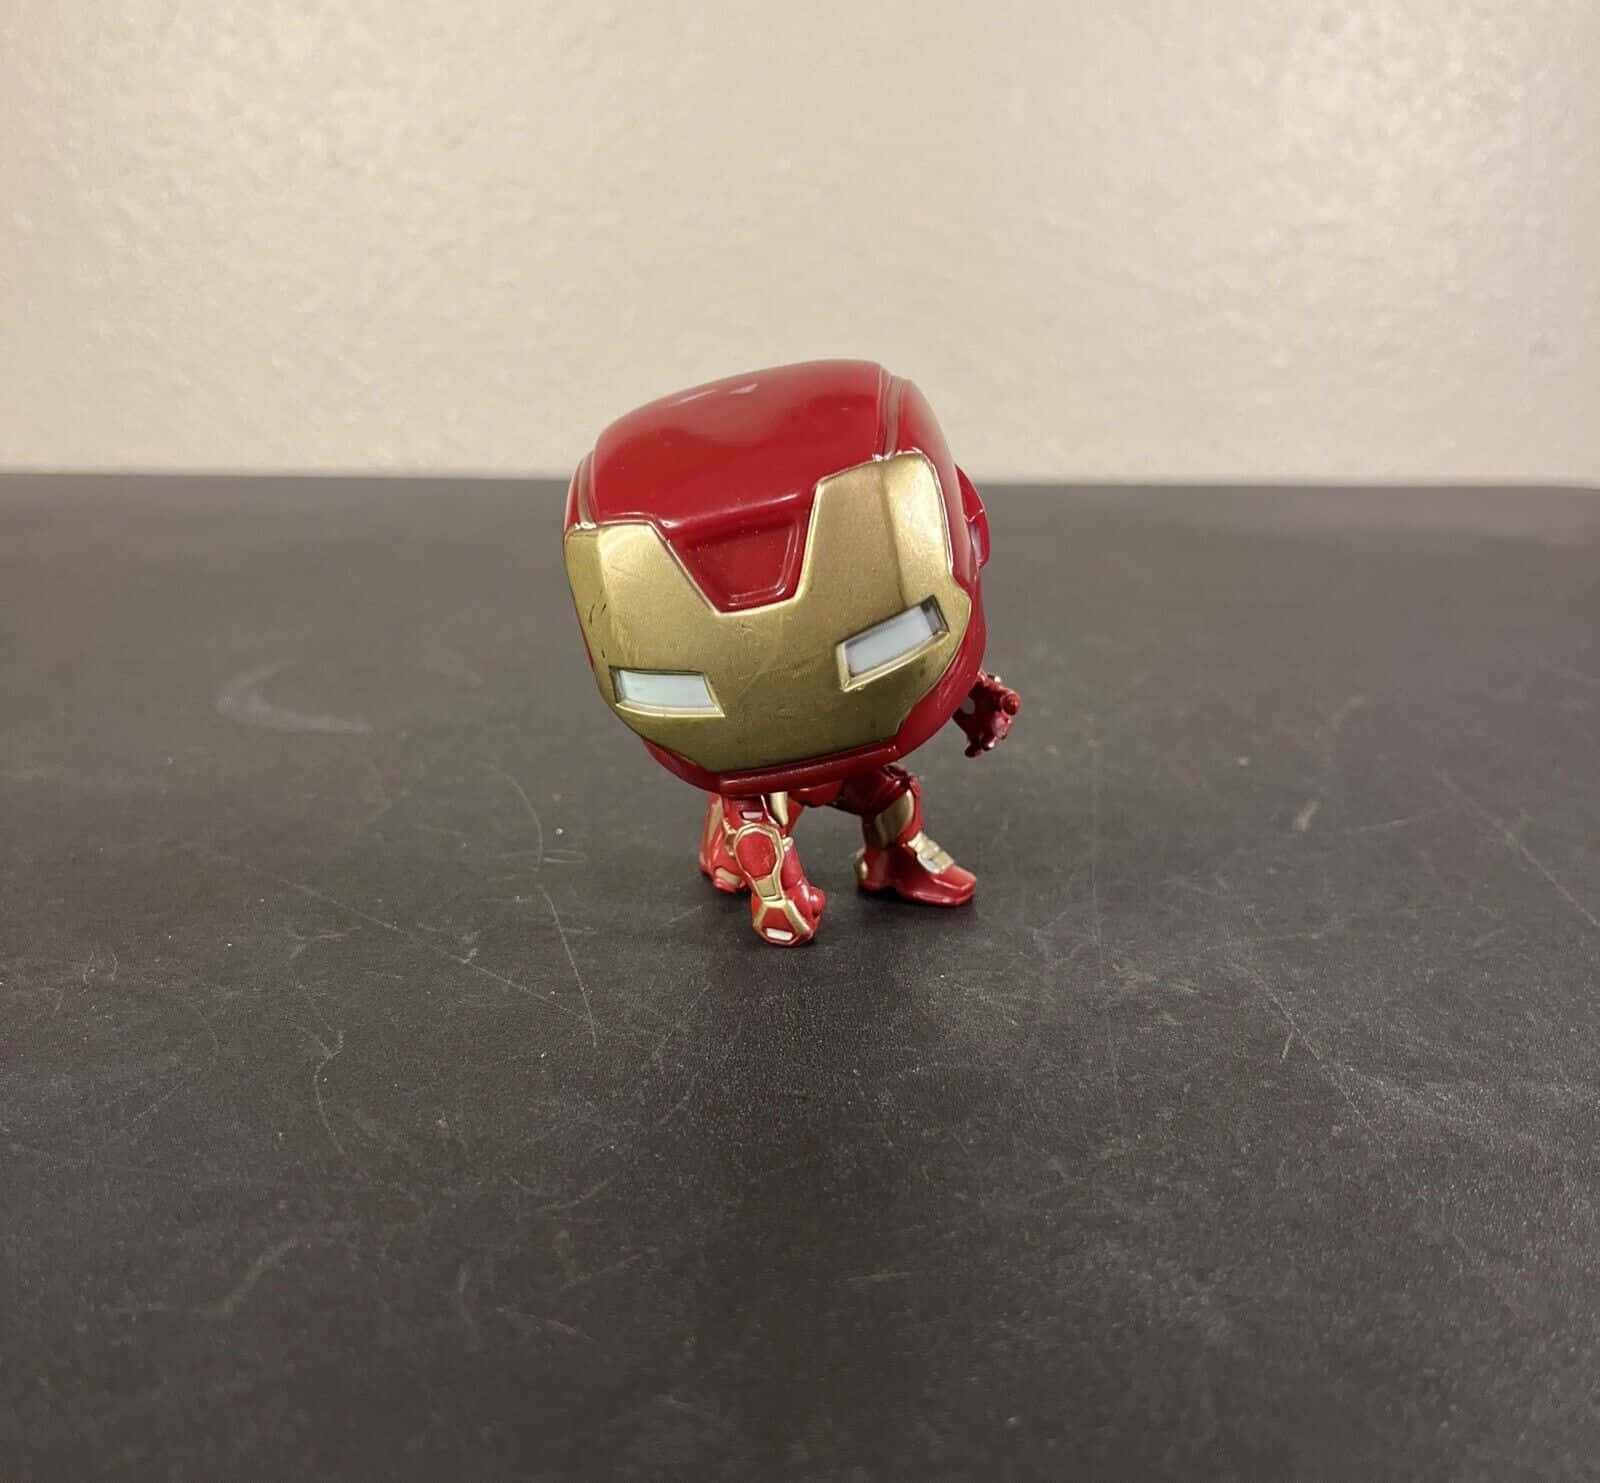 Collect and display your favorite Iron Man bobblehead figures Wallpaper